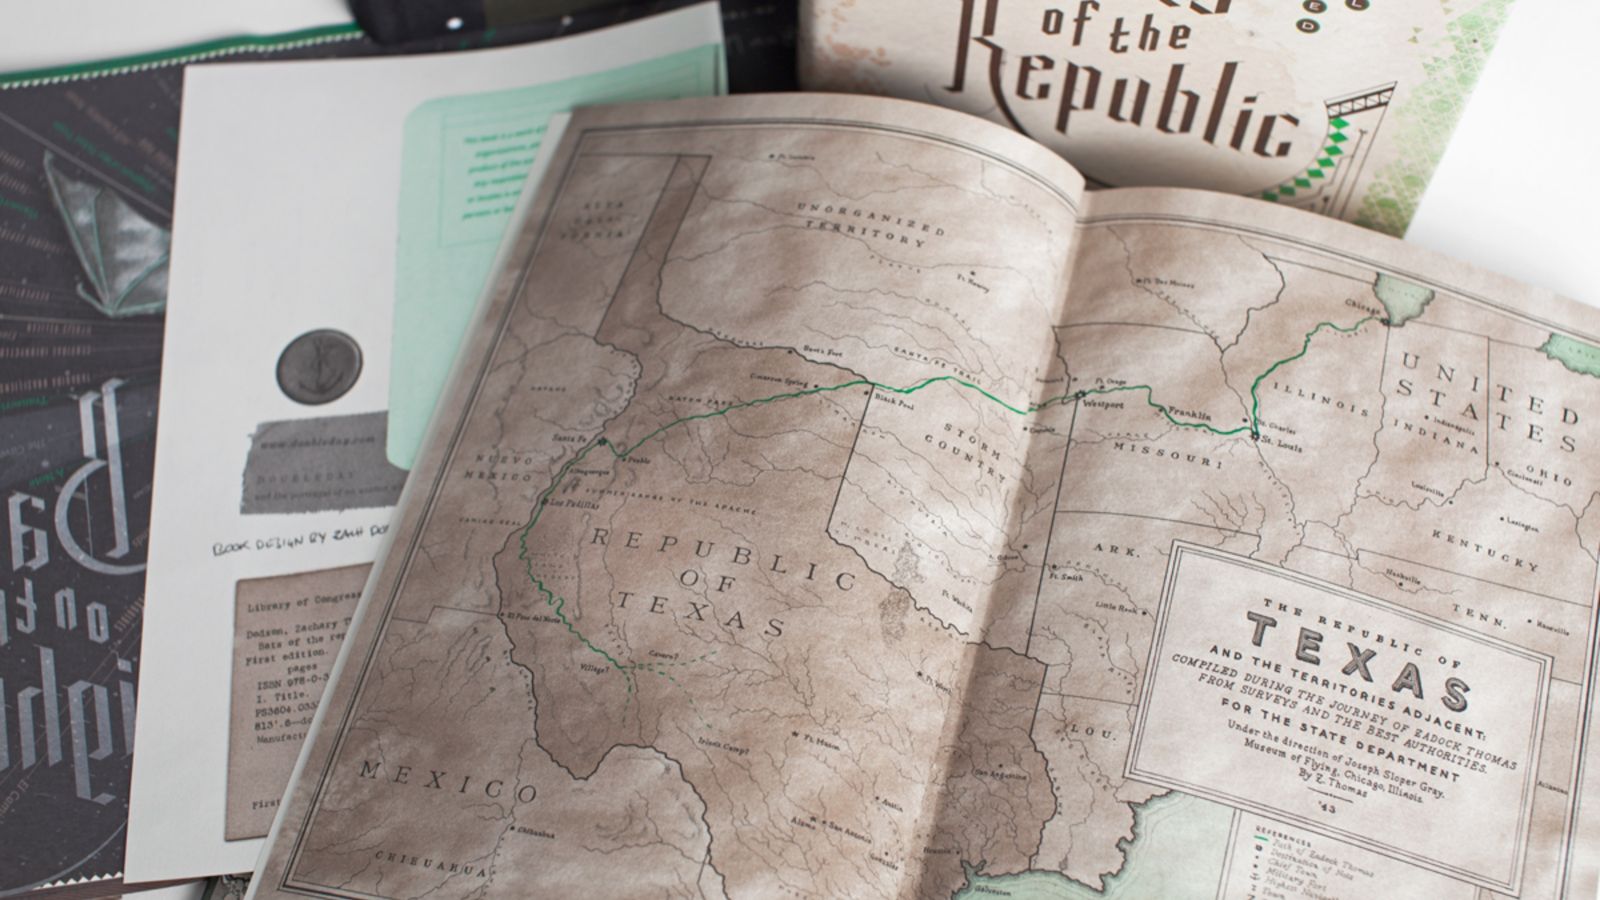 Old-looking sepia-toned map of Texas and hardback book